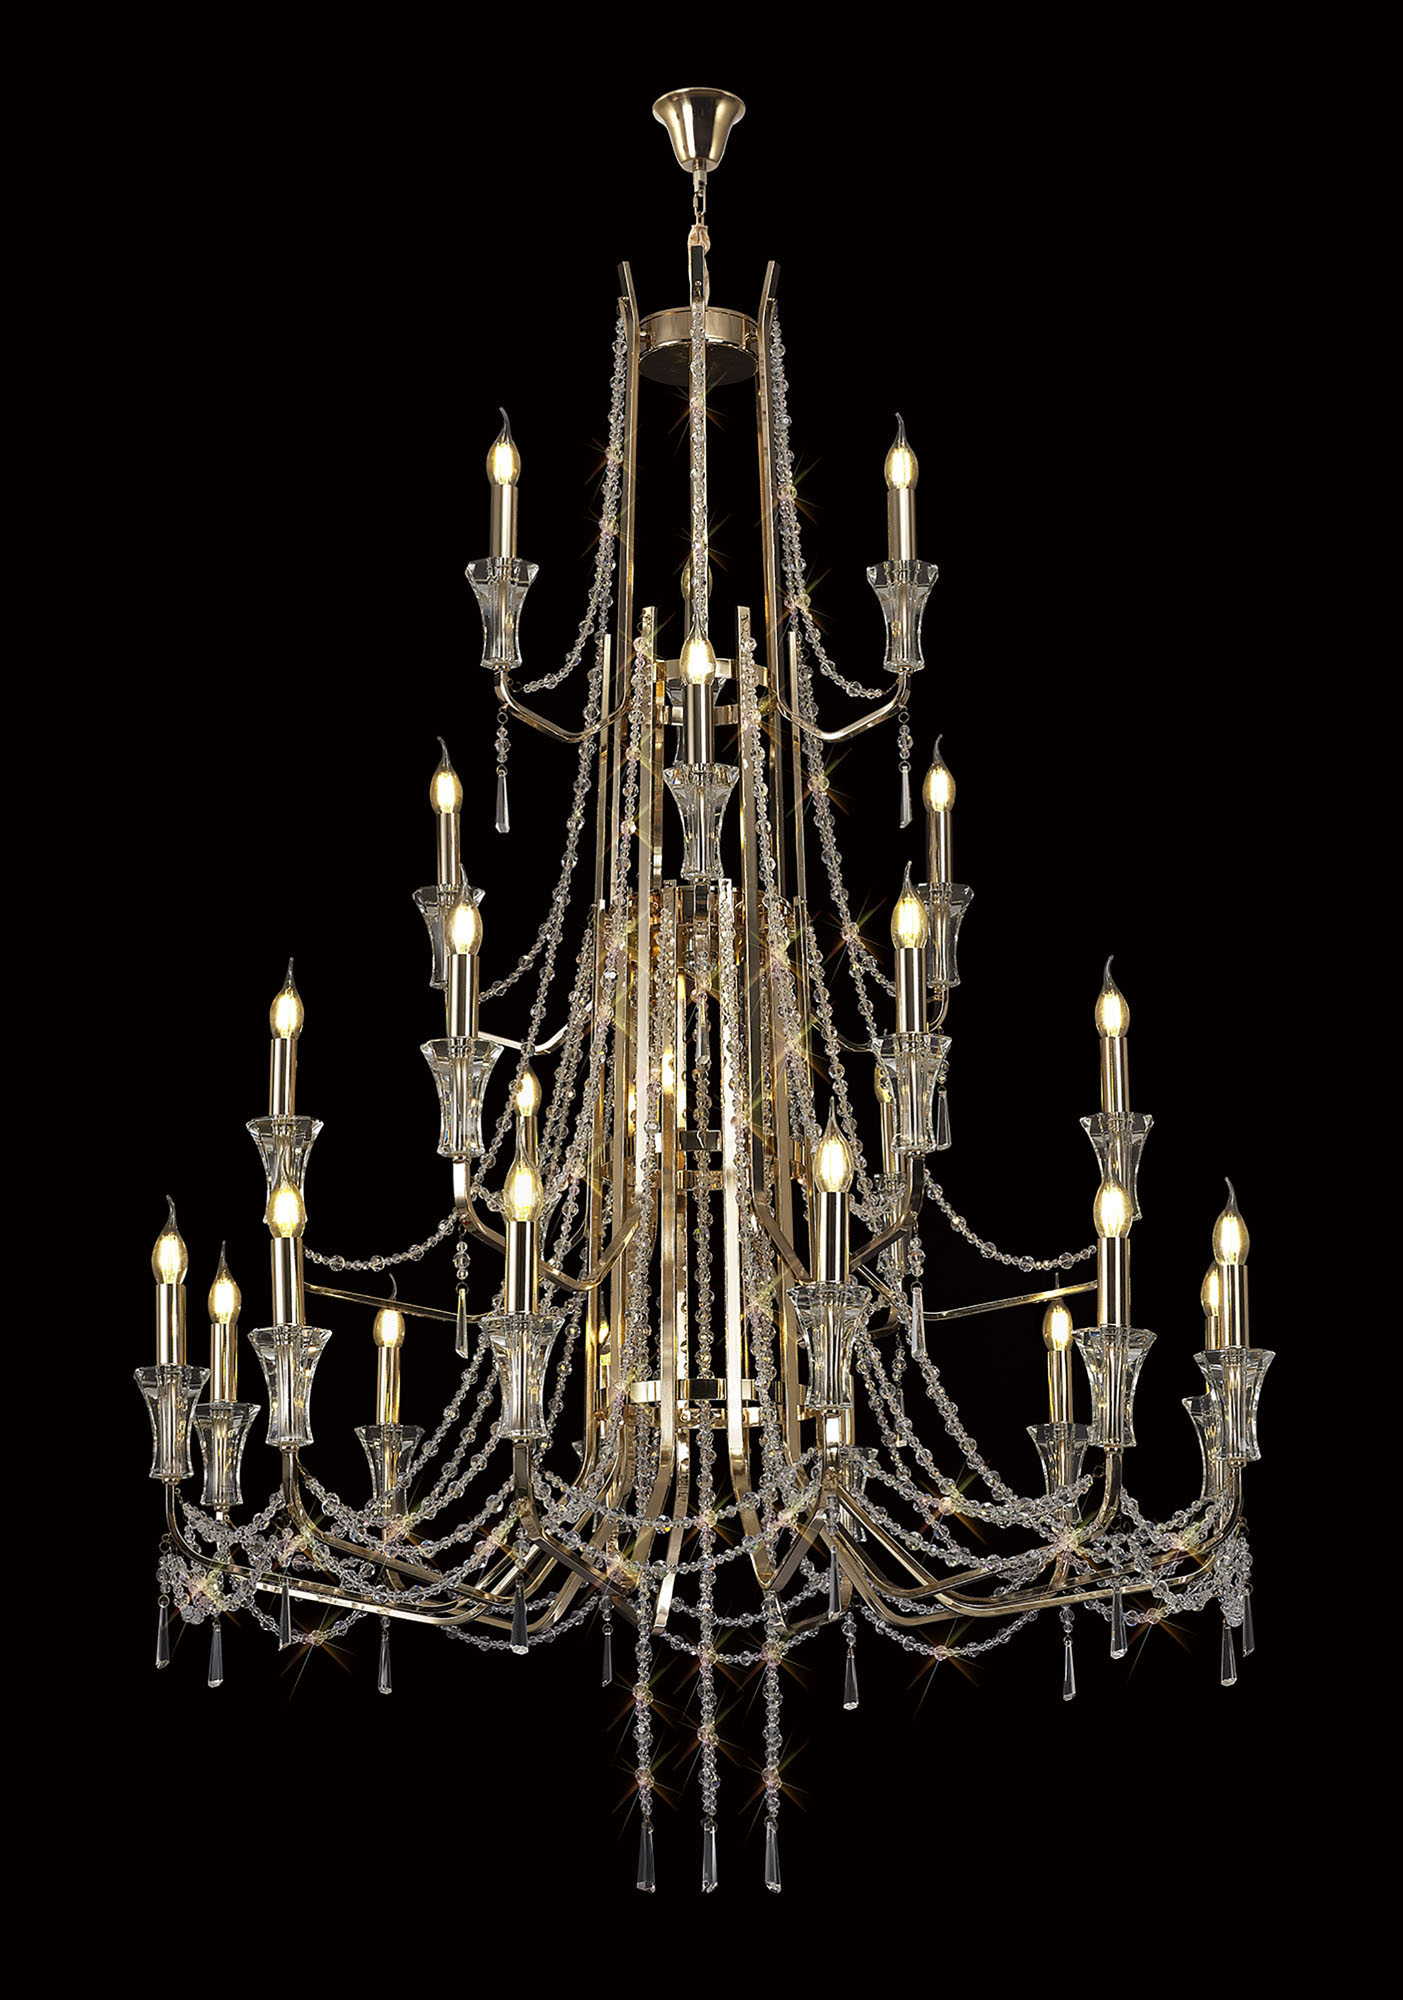 Armand French Gold Crystal Ceiling Lights Diyas Statement Crystal Fittings